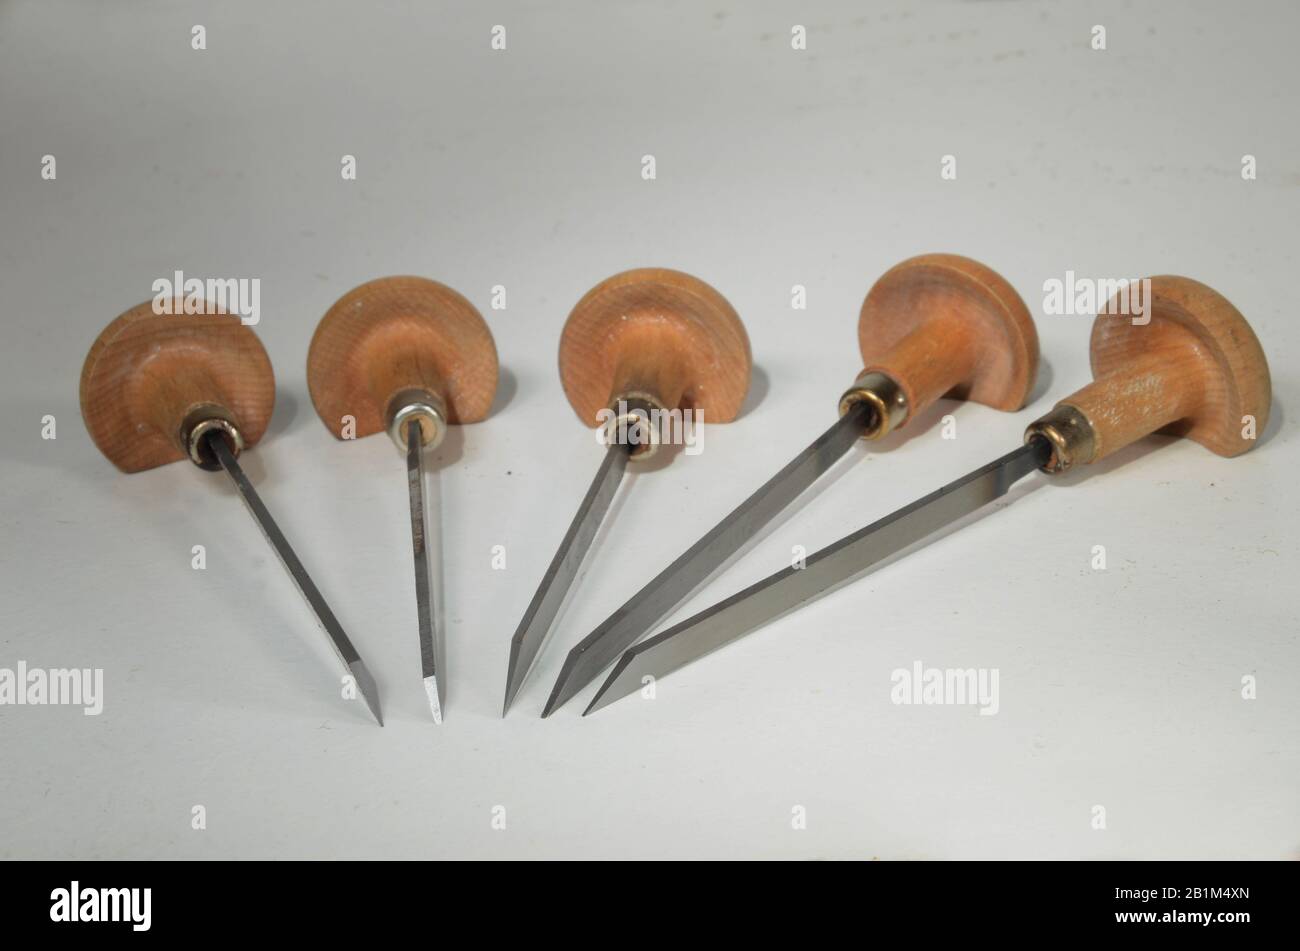 Arrangement with graving tools with cutting edges in different shapes. Stock Photo